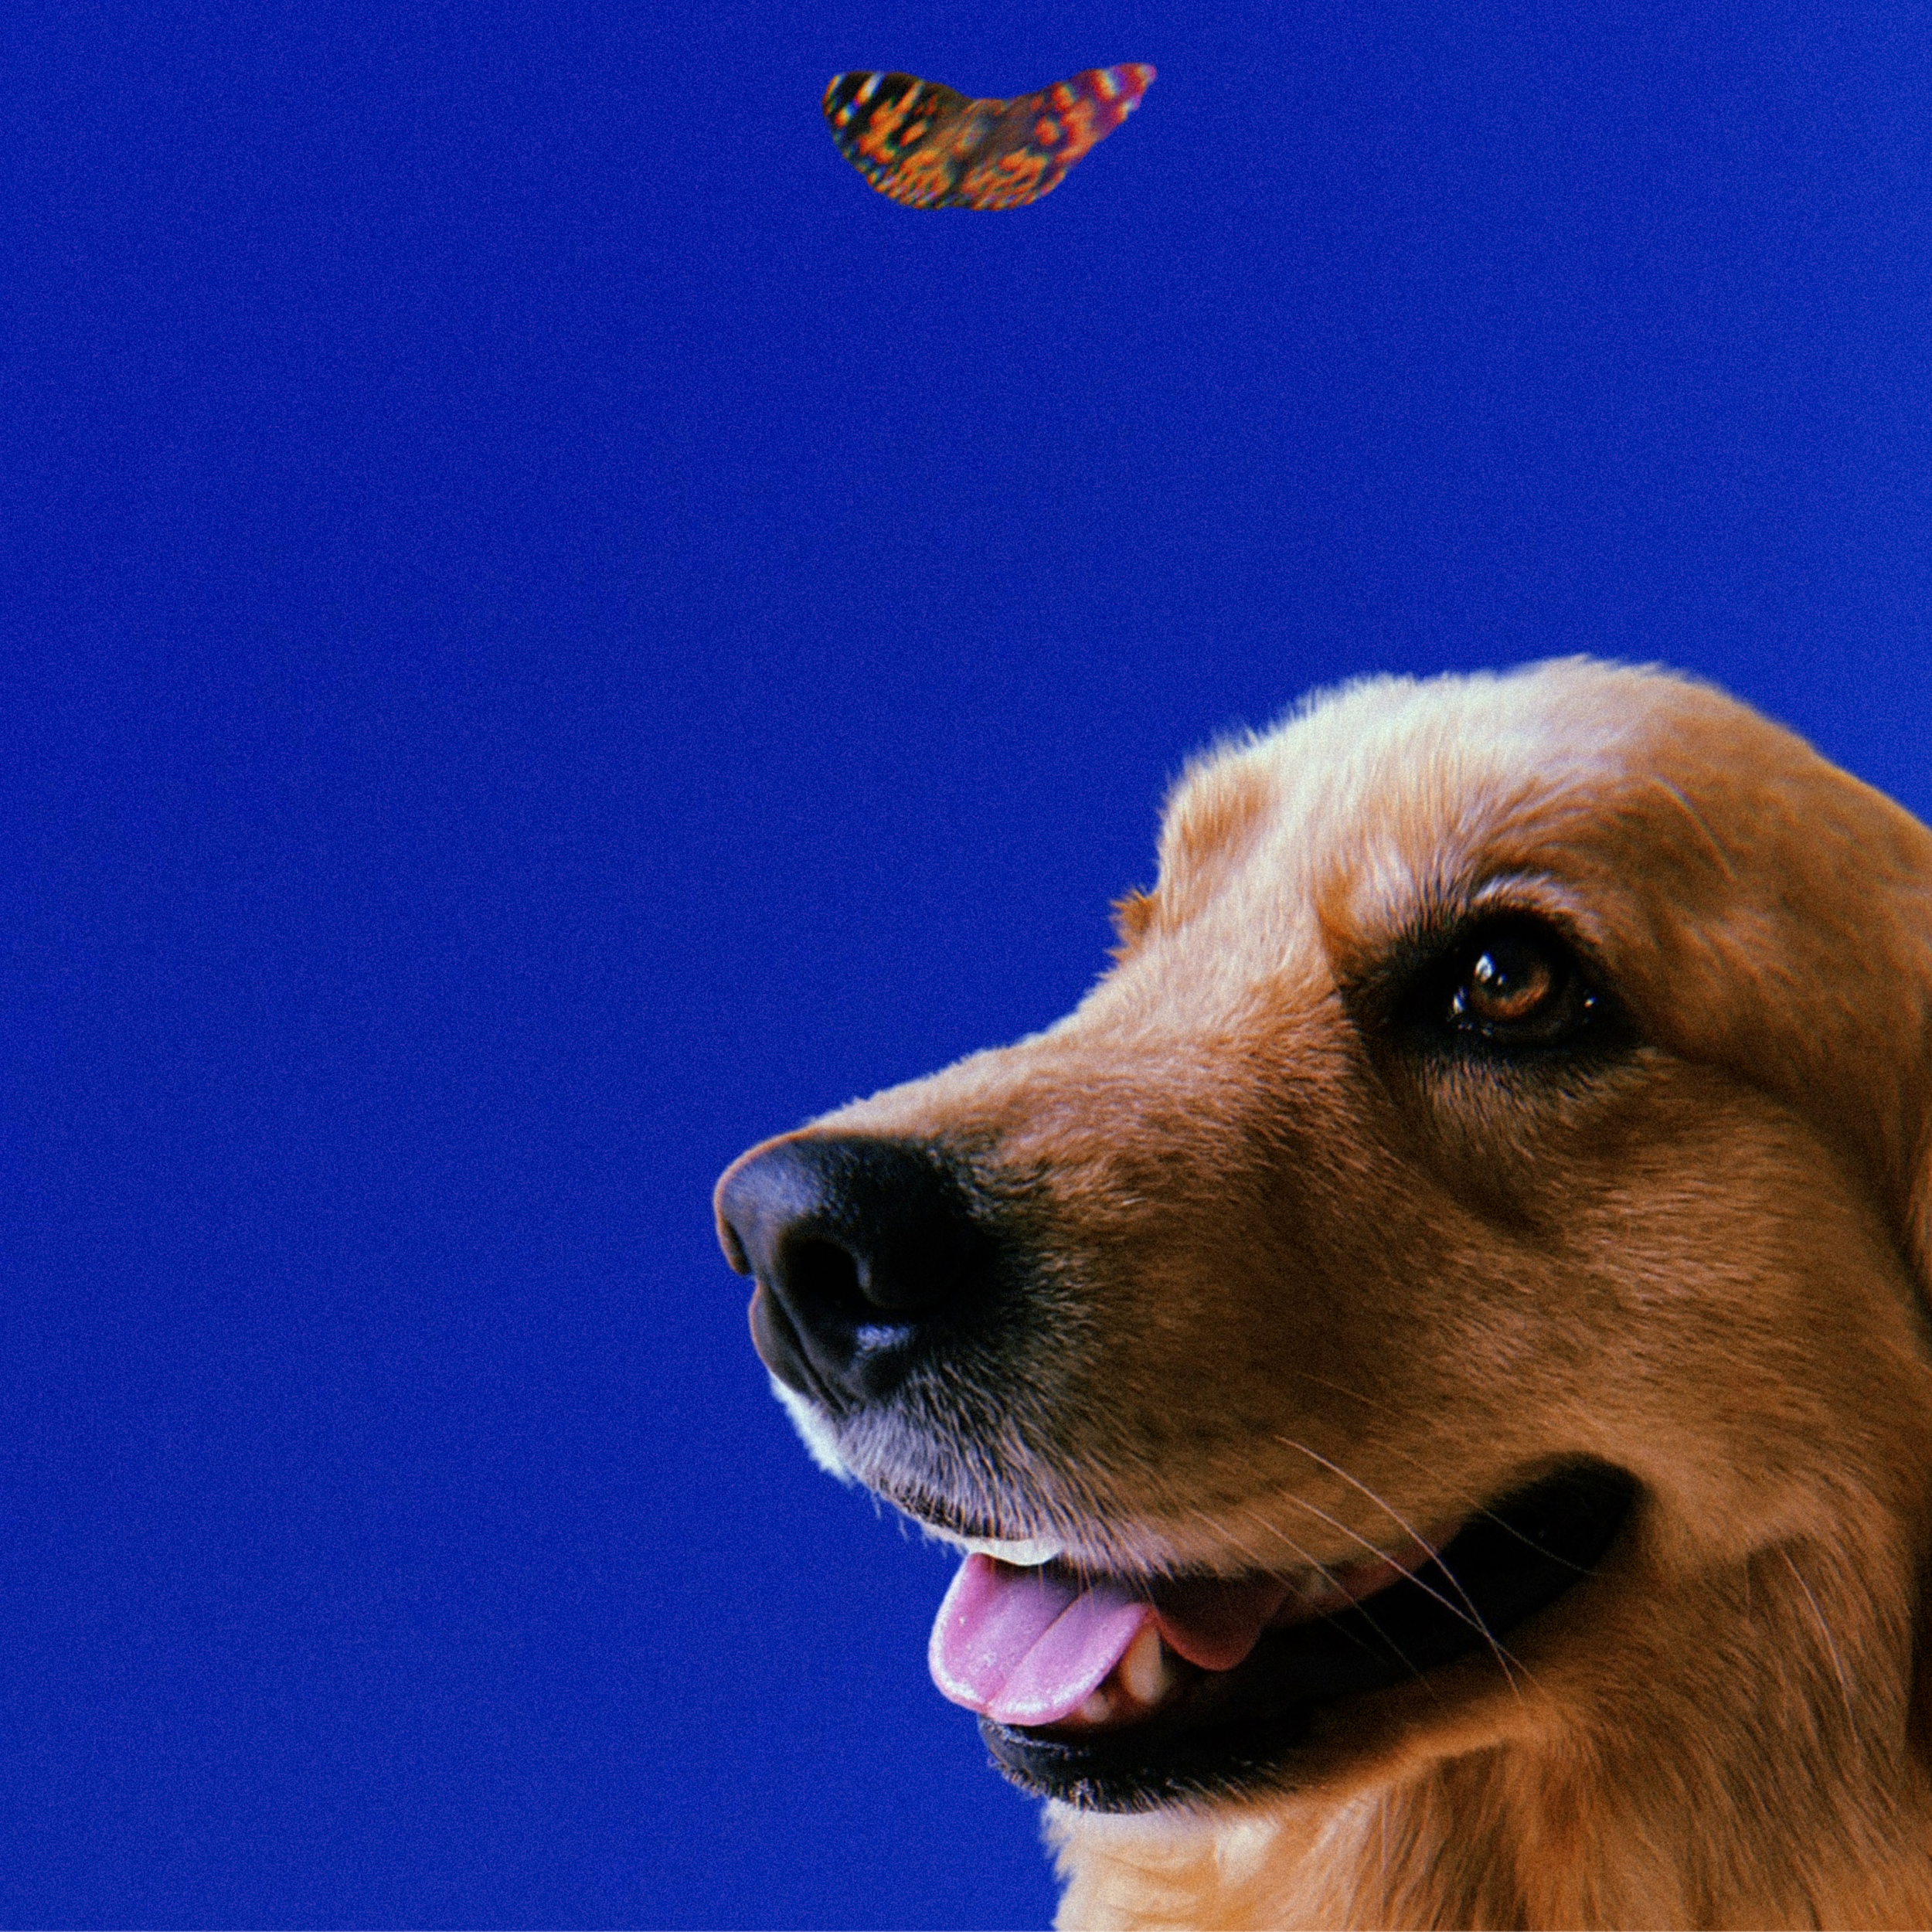 An adolescent female Golden Retriever smiles as she looks up at a monarch butterfly flying overhead